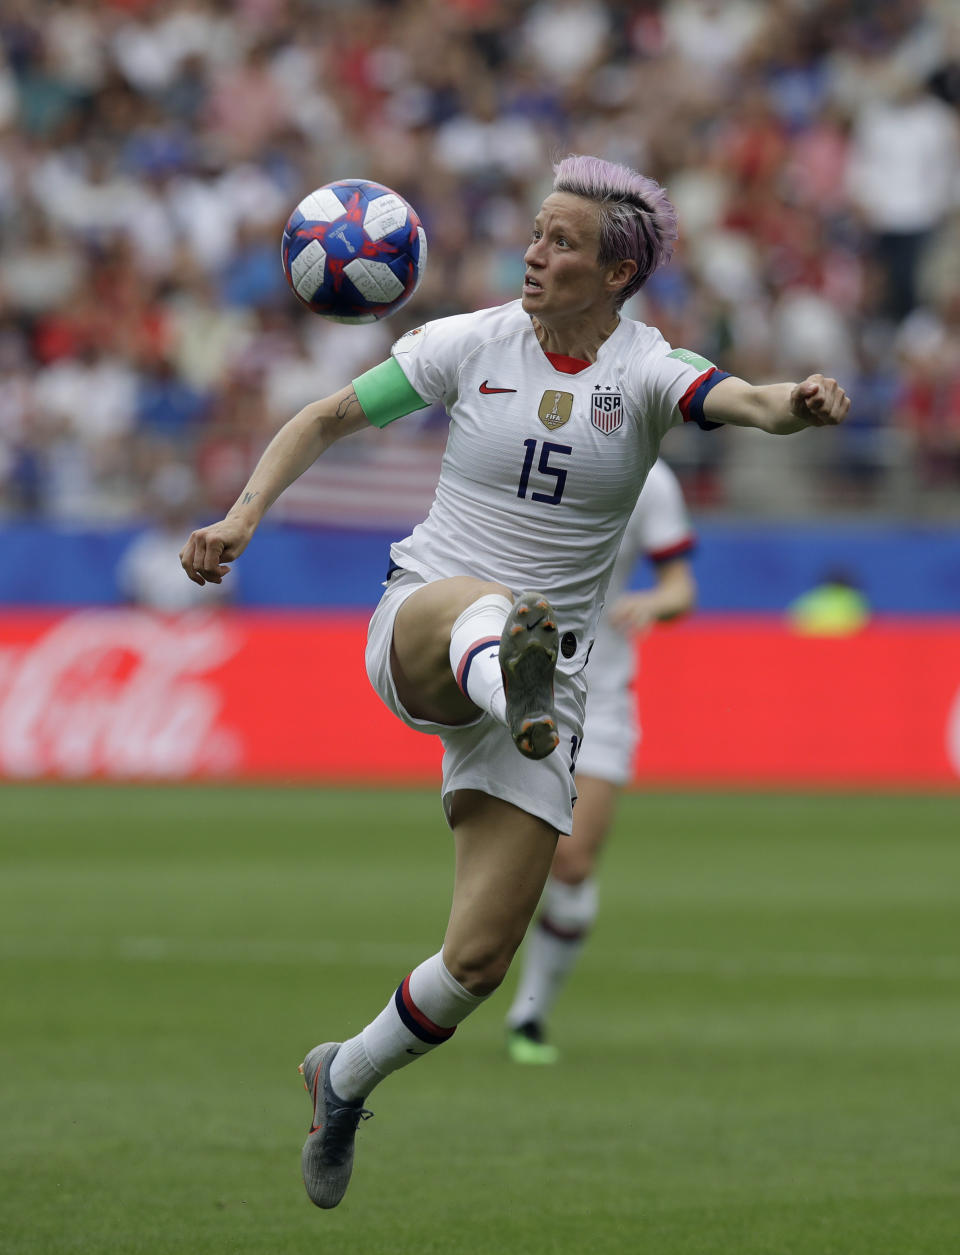 United States'Megan Rapinoe controls the ball during the Women's World Cup round of 16 soccer match between Spain and US at the Stade Auguste-Delaune in Reims, France, Monday, June 24, 2019. (AP Photo/Alessandra Tarantino)